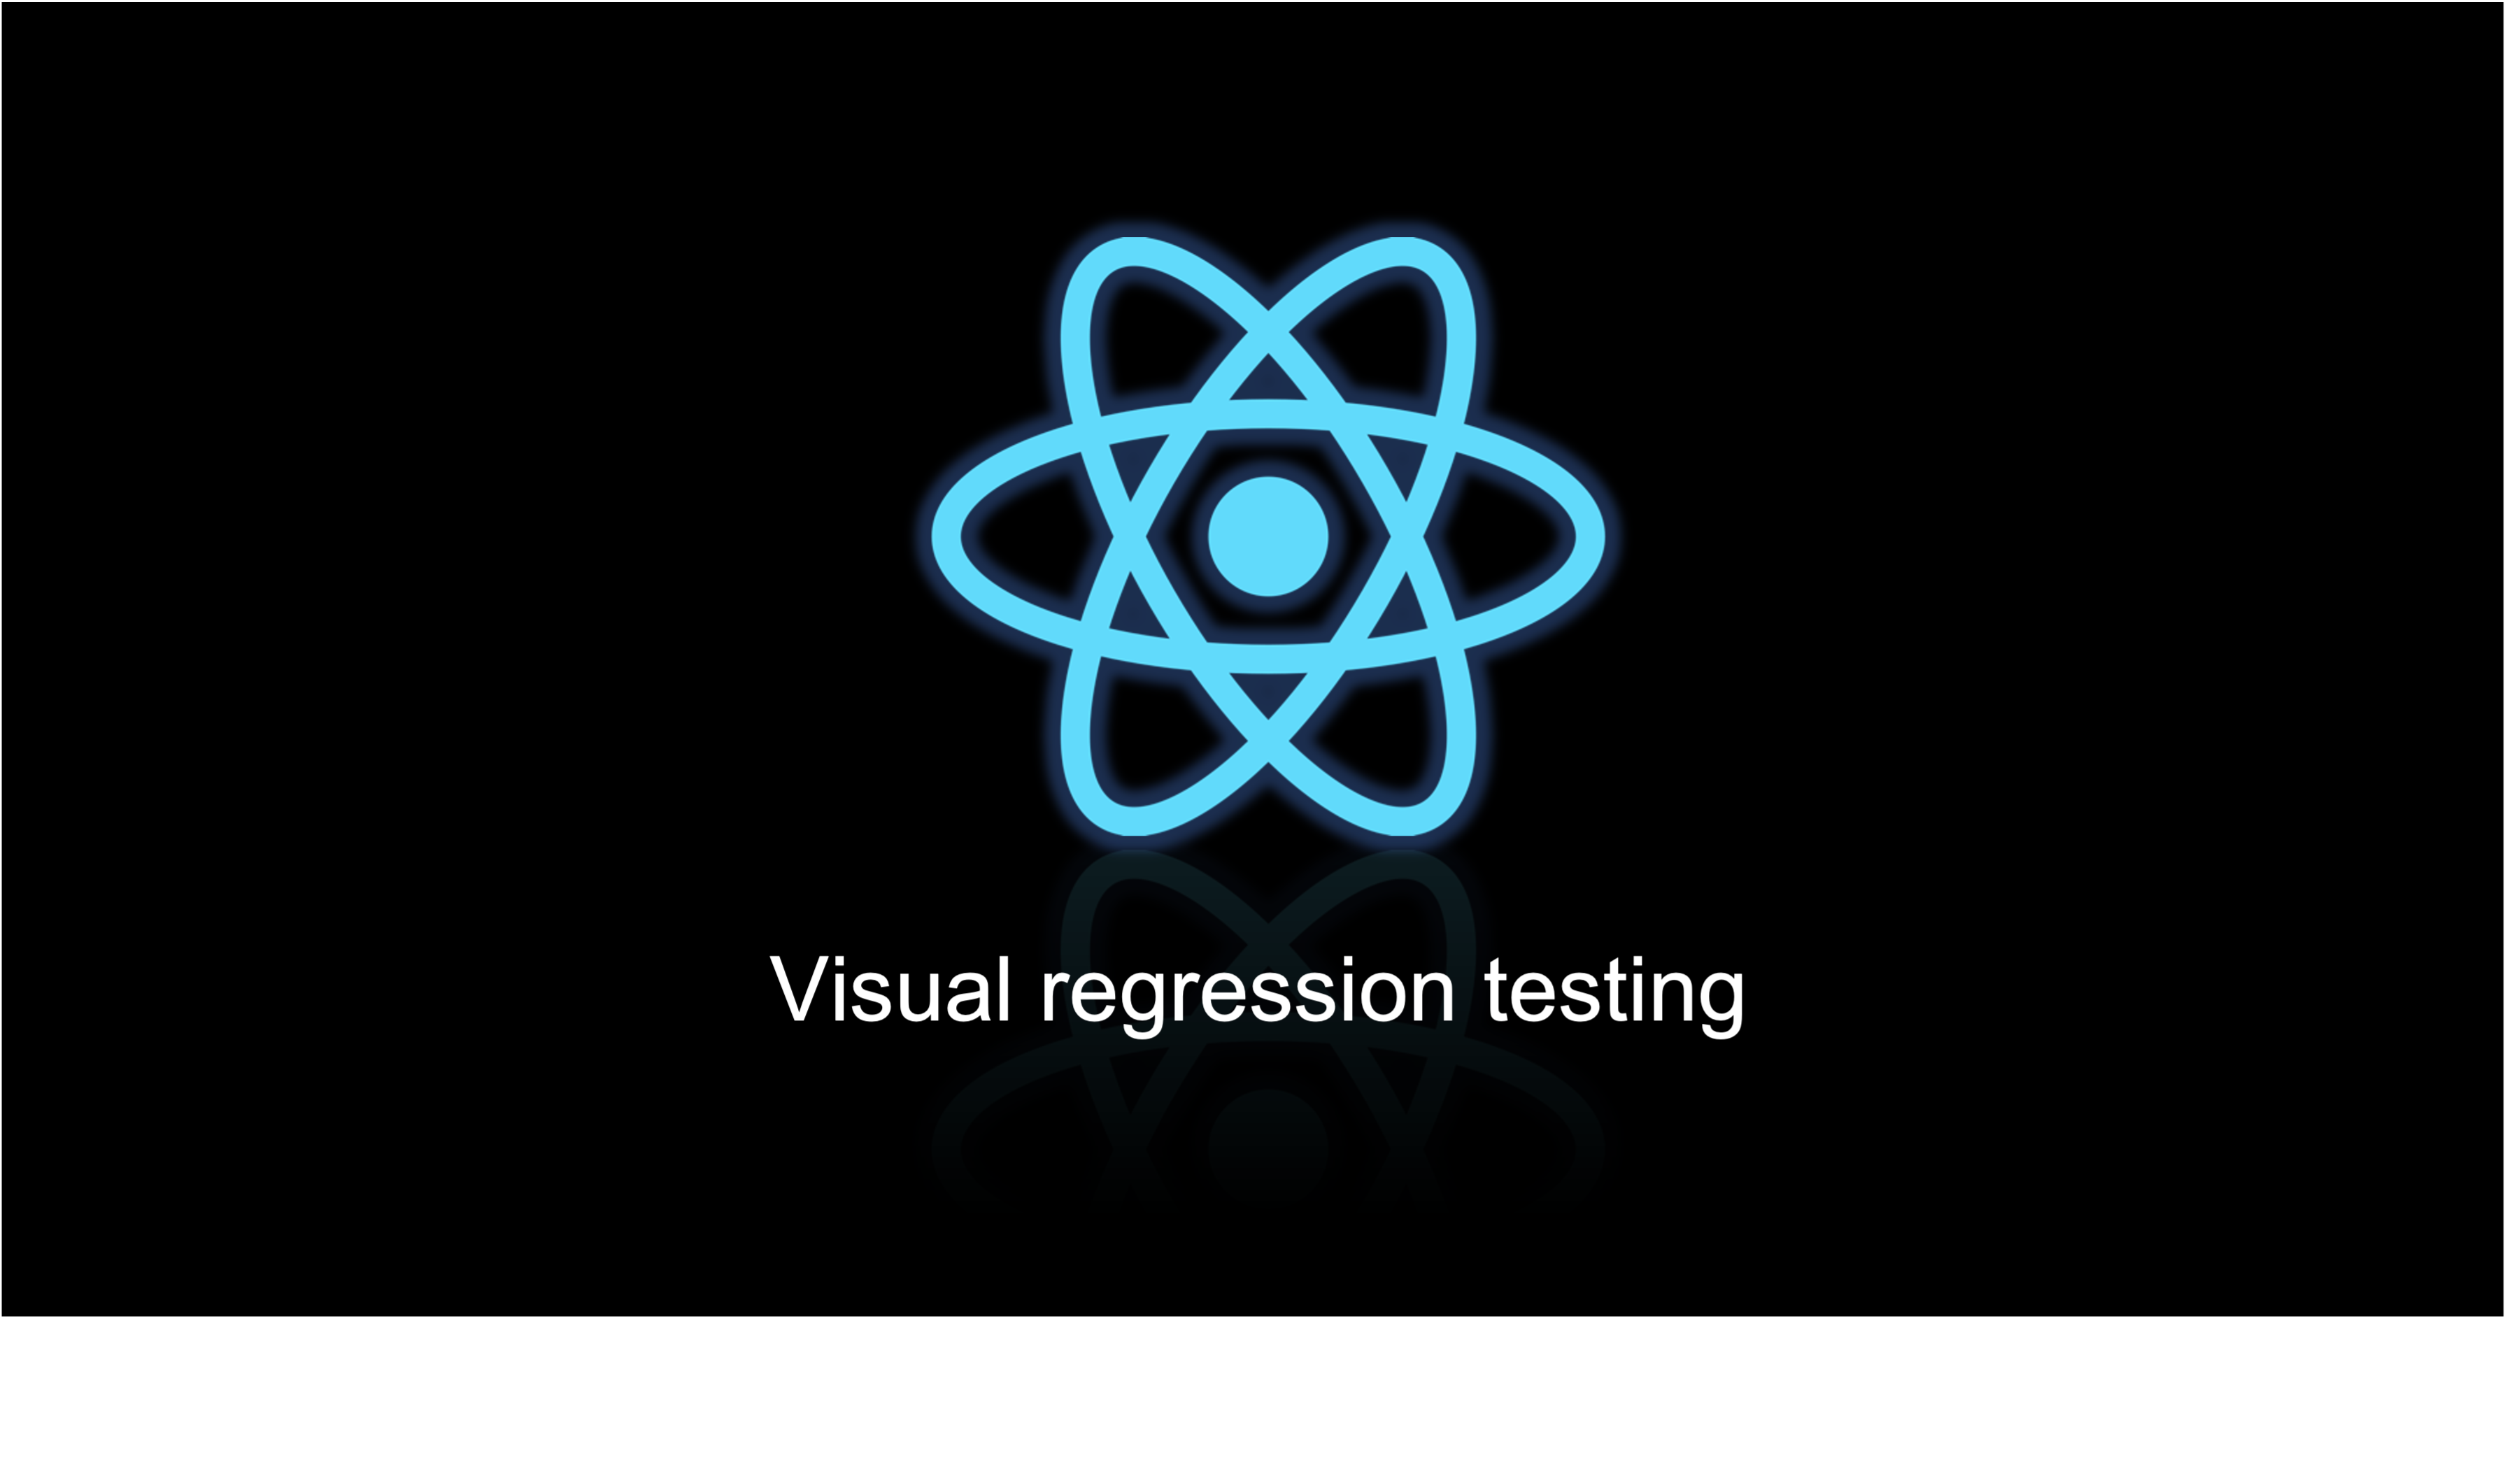 React's logo and a text saying "visual regression testing" on a black background